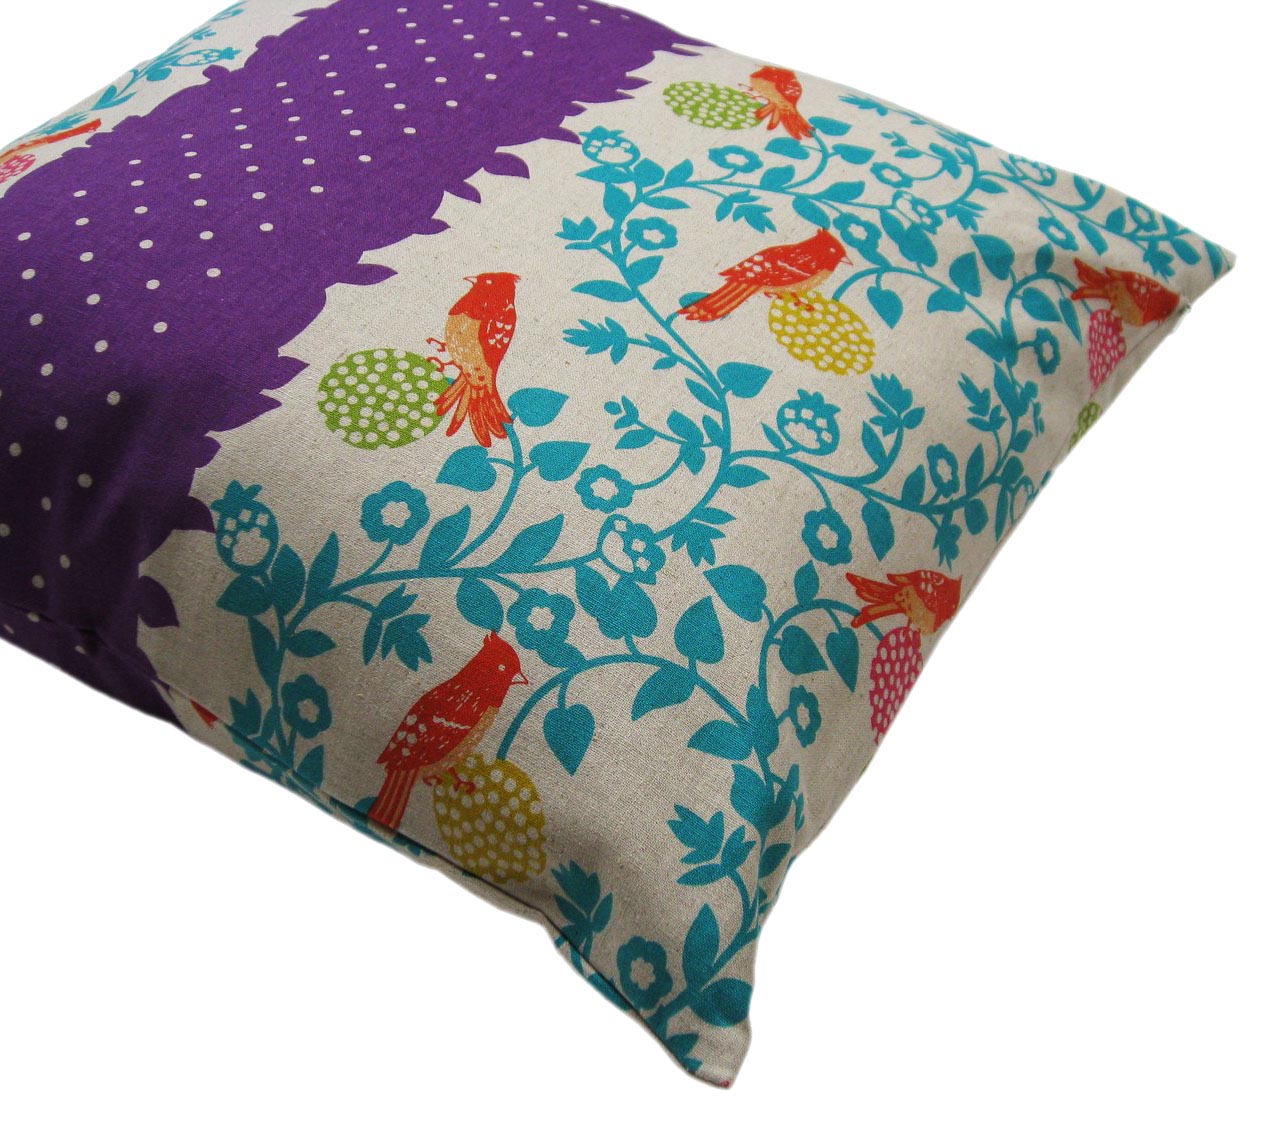 Teal and Purple Throw Pillows